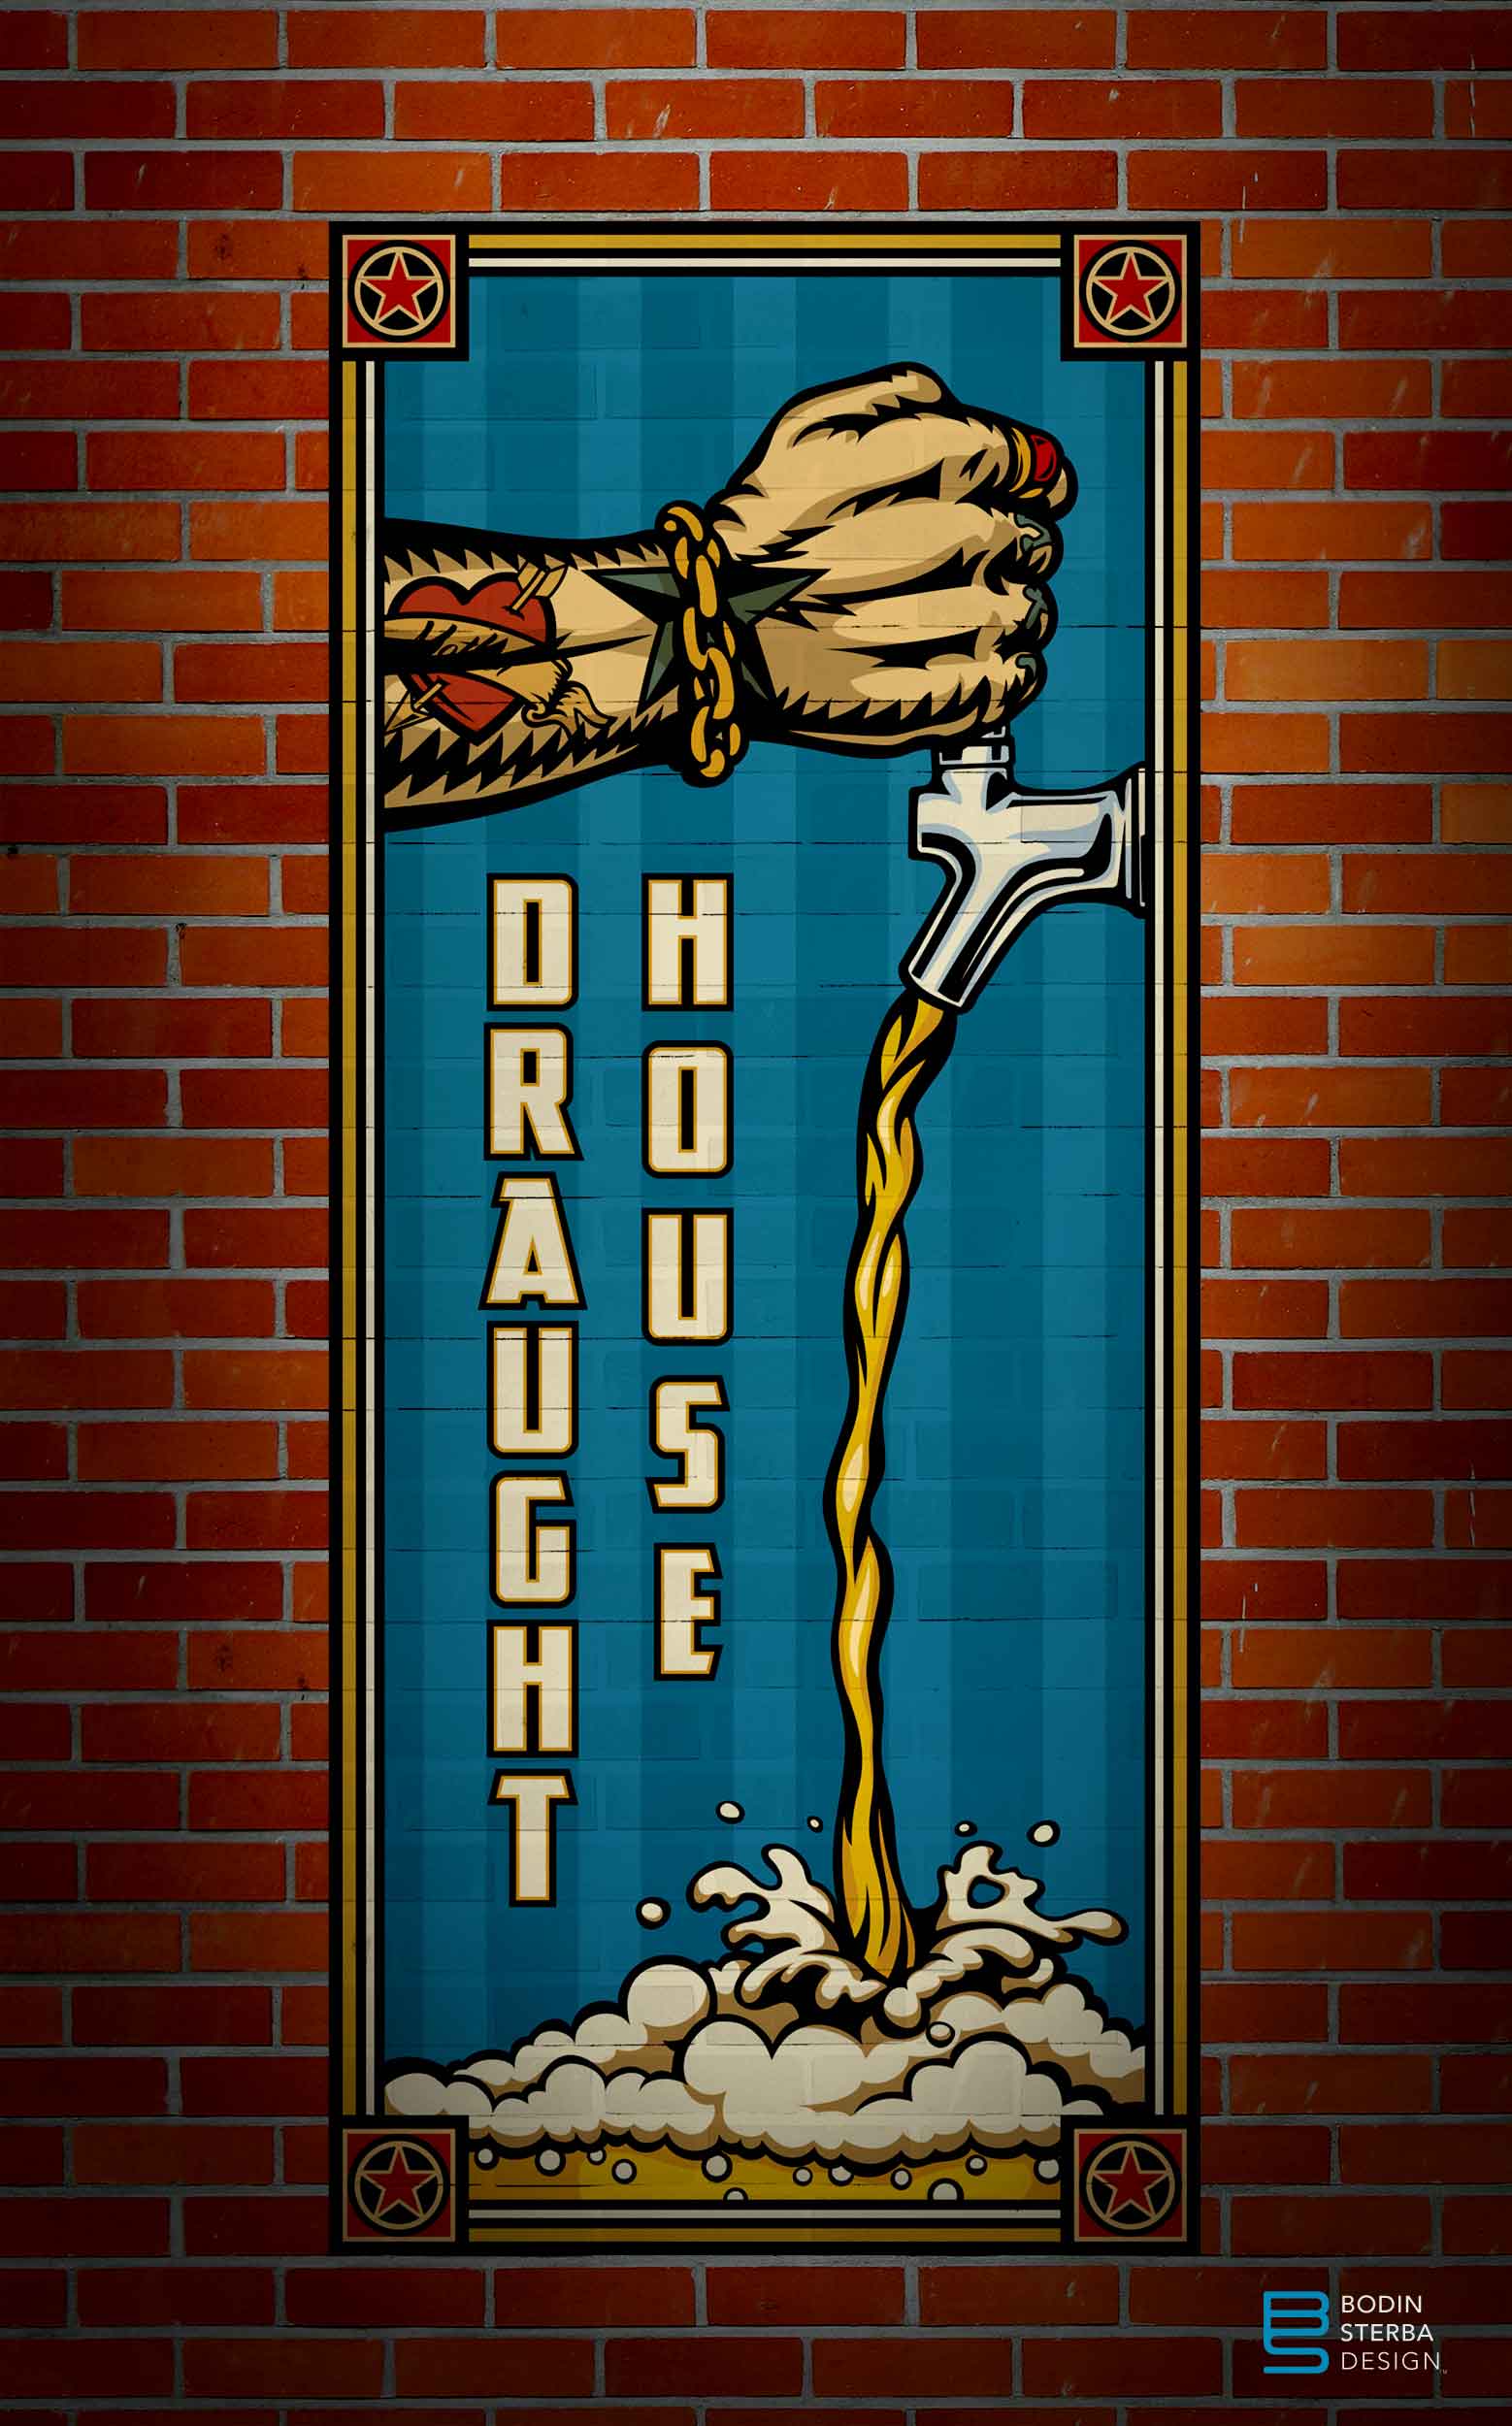 Brewco Draught House 7' x 3' wall mural